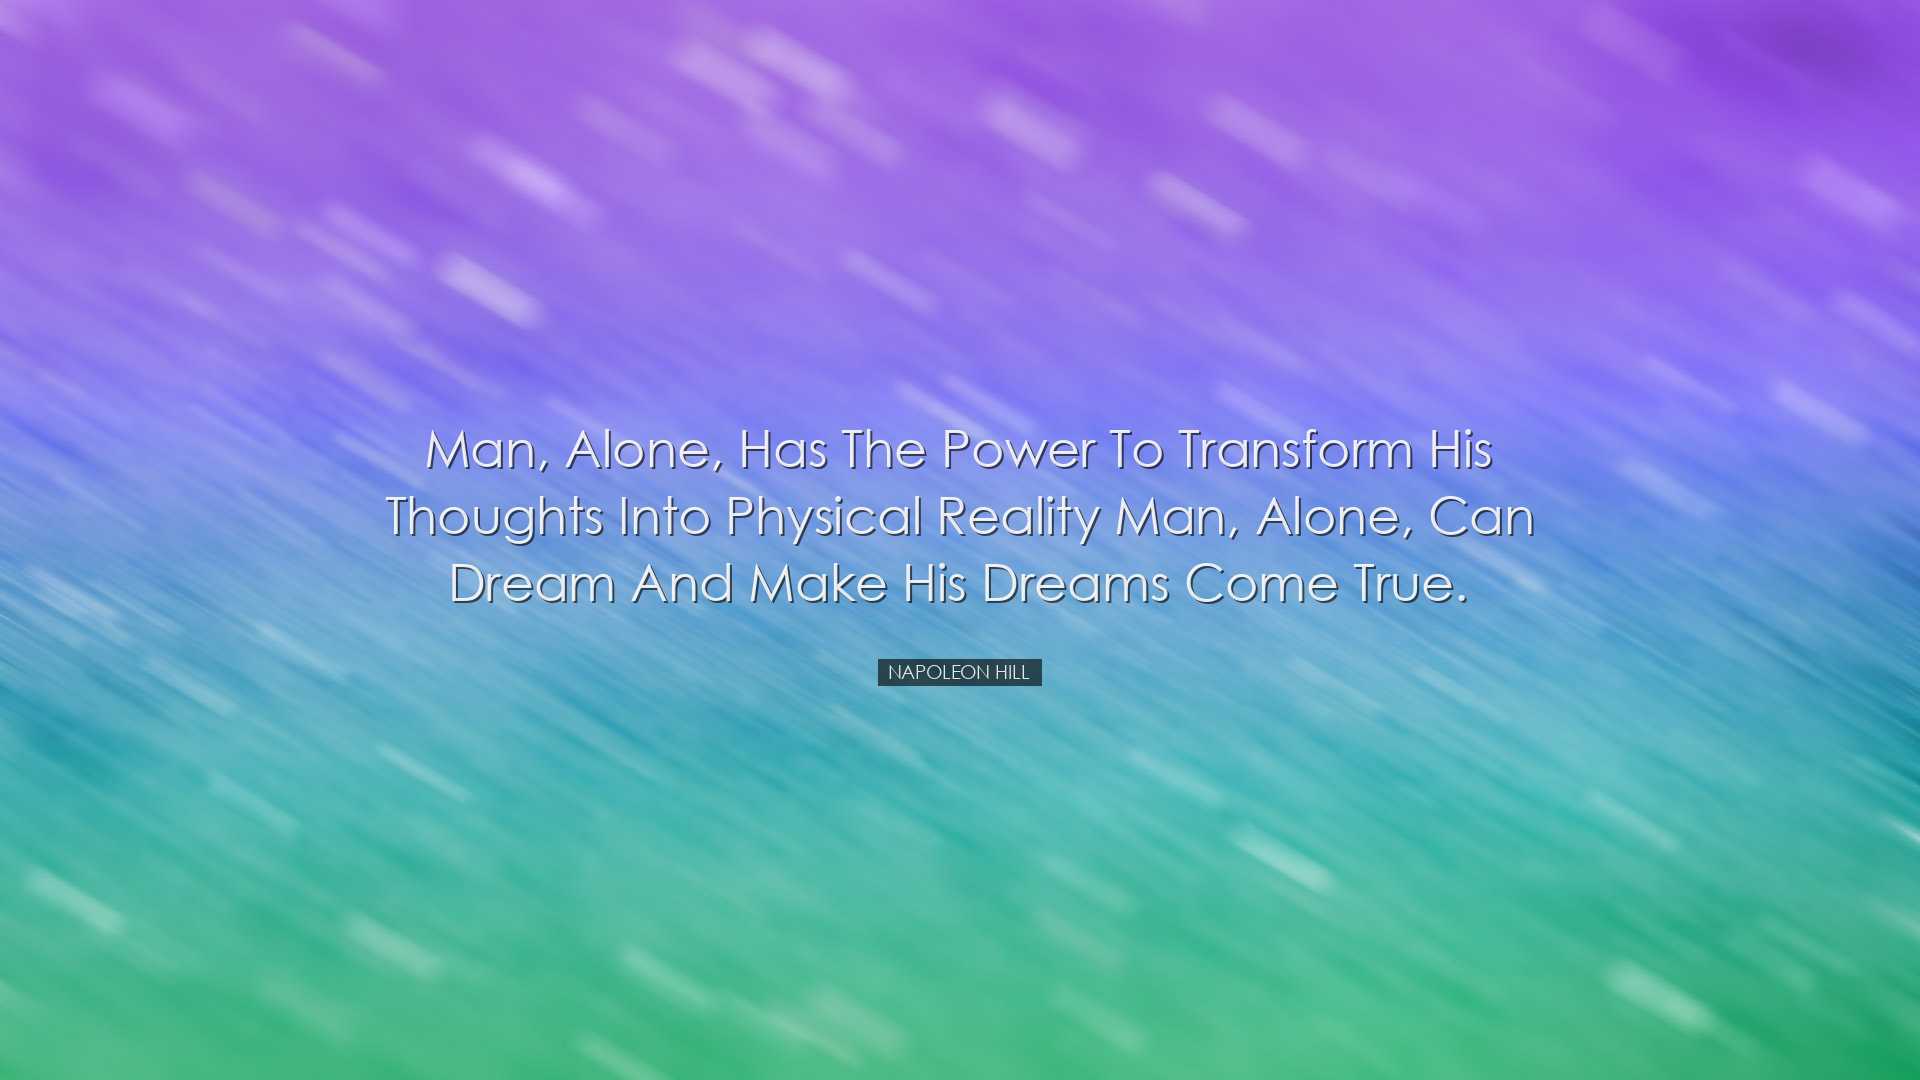 Man, alone, has the power to transform his thoughts into physical